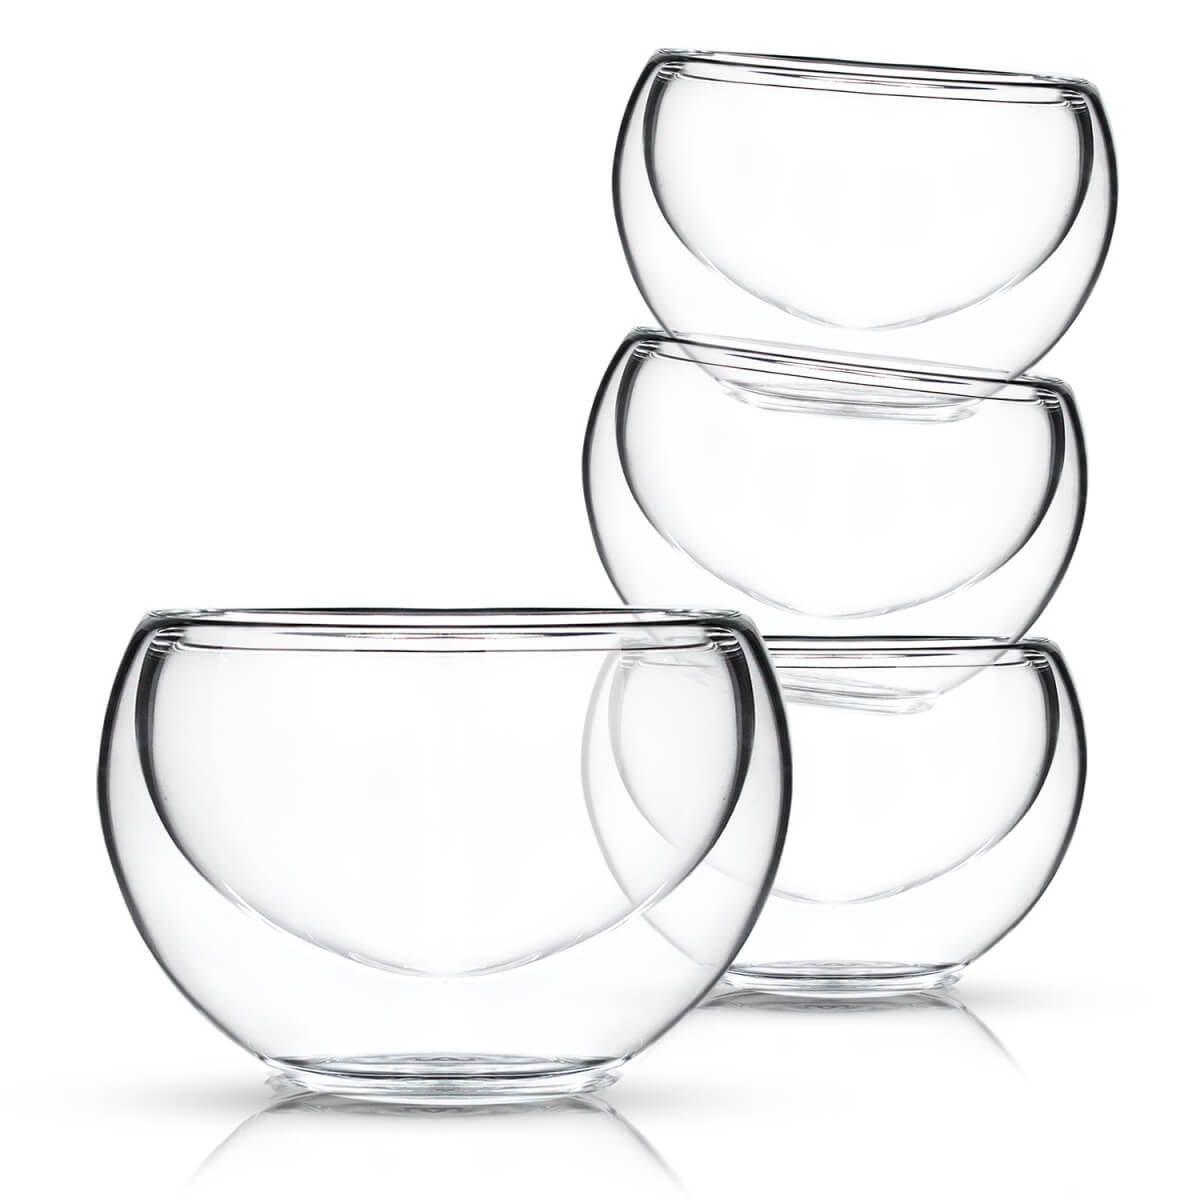 Double Wall Glass Cappuccino Cups, 6oz - Kitchables